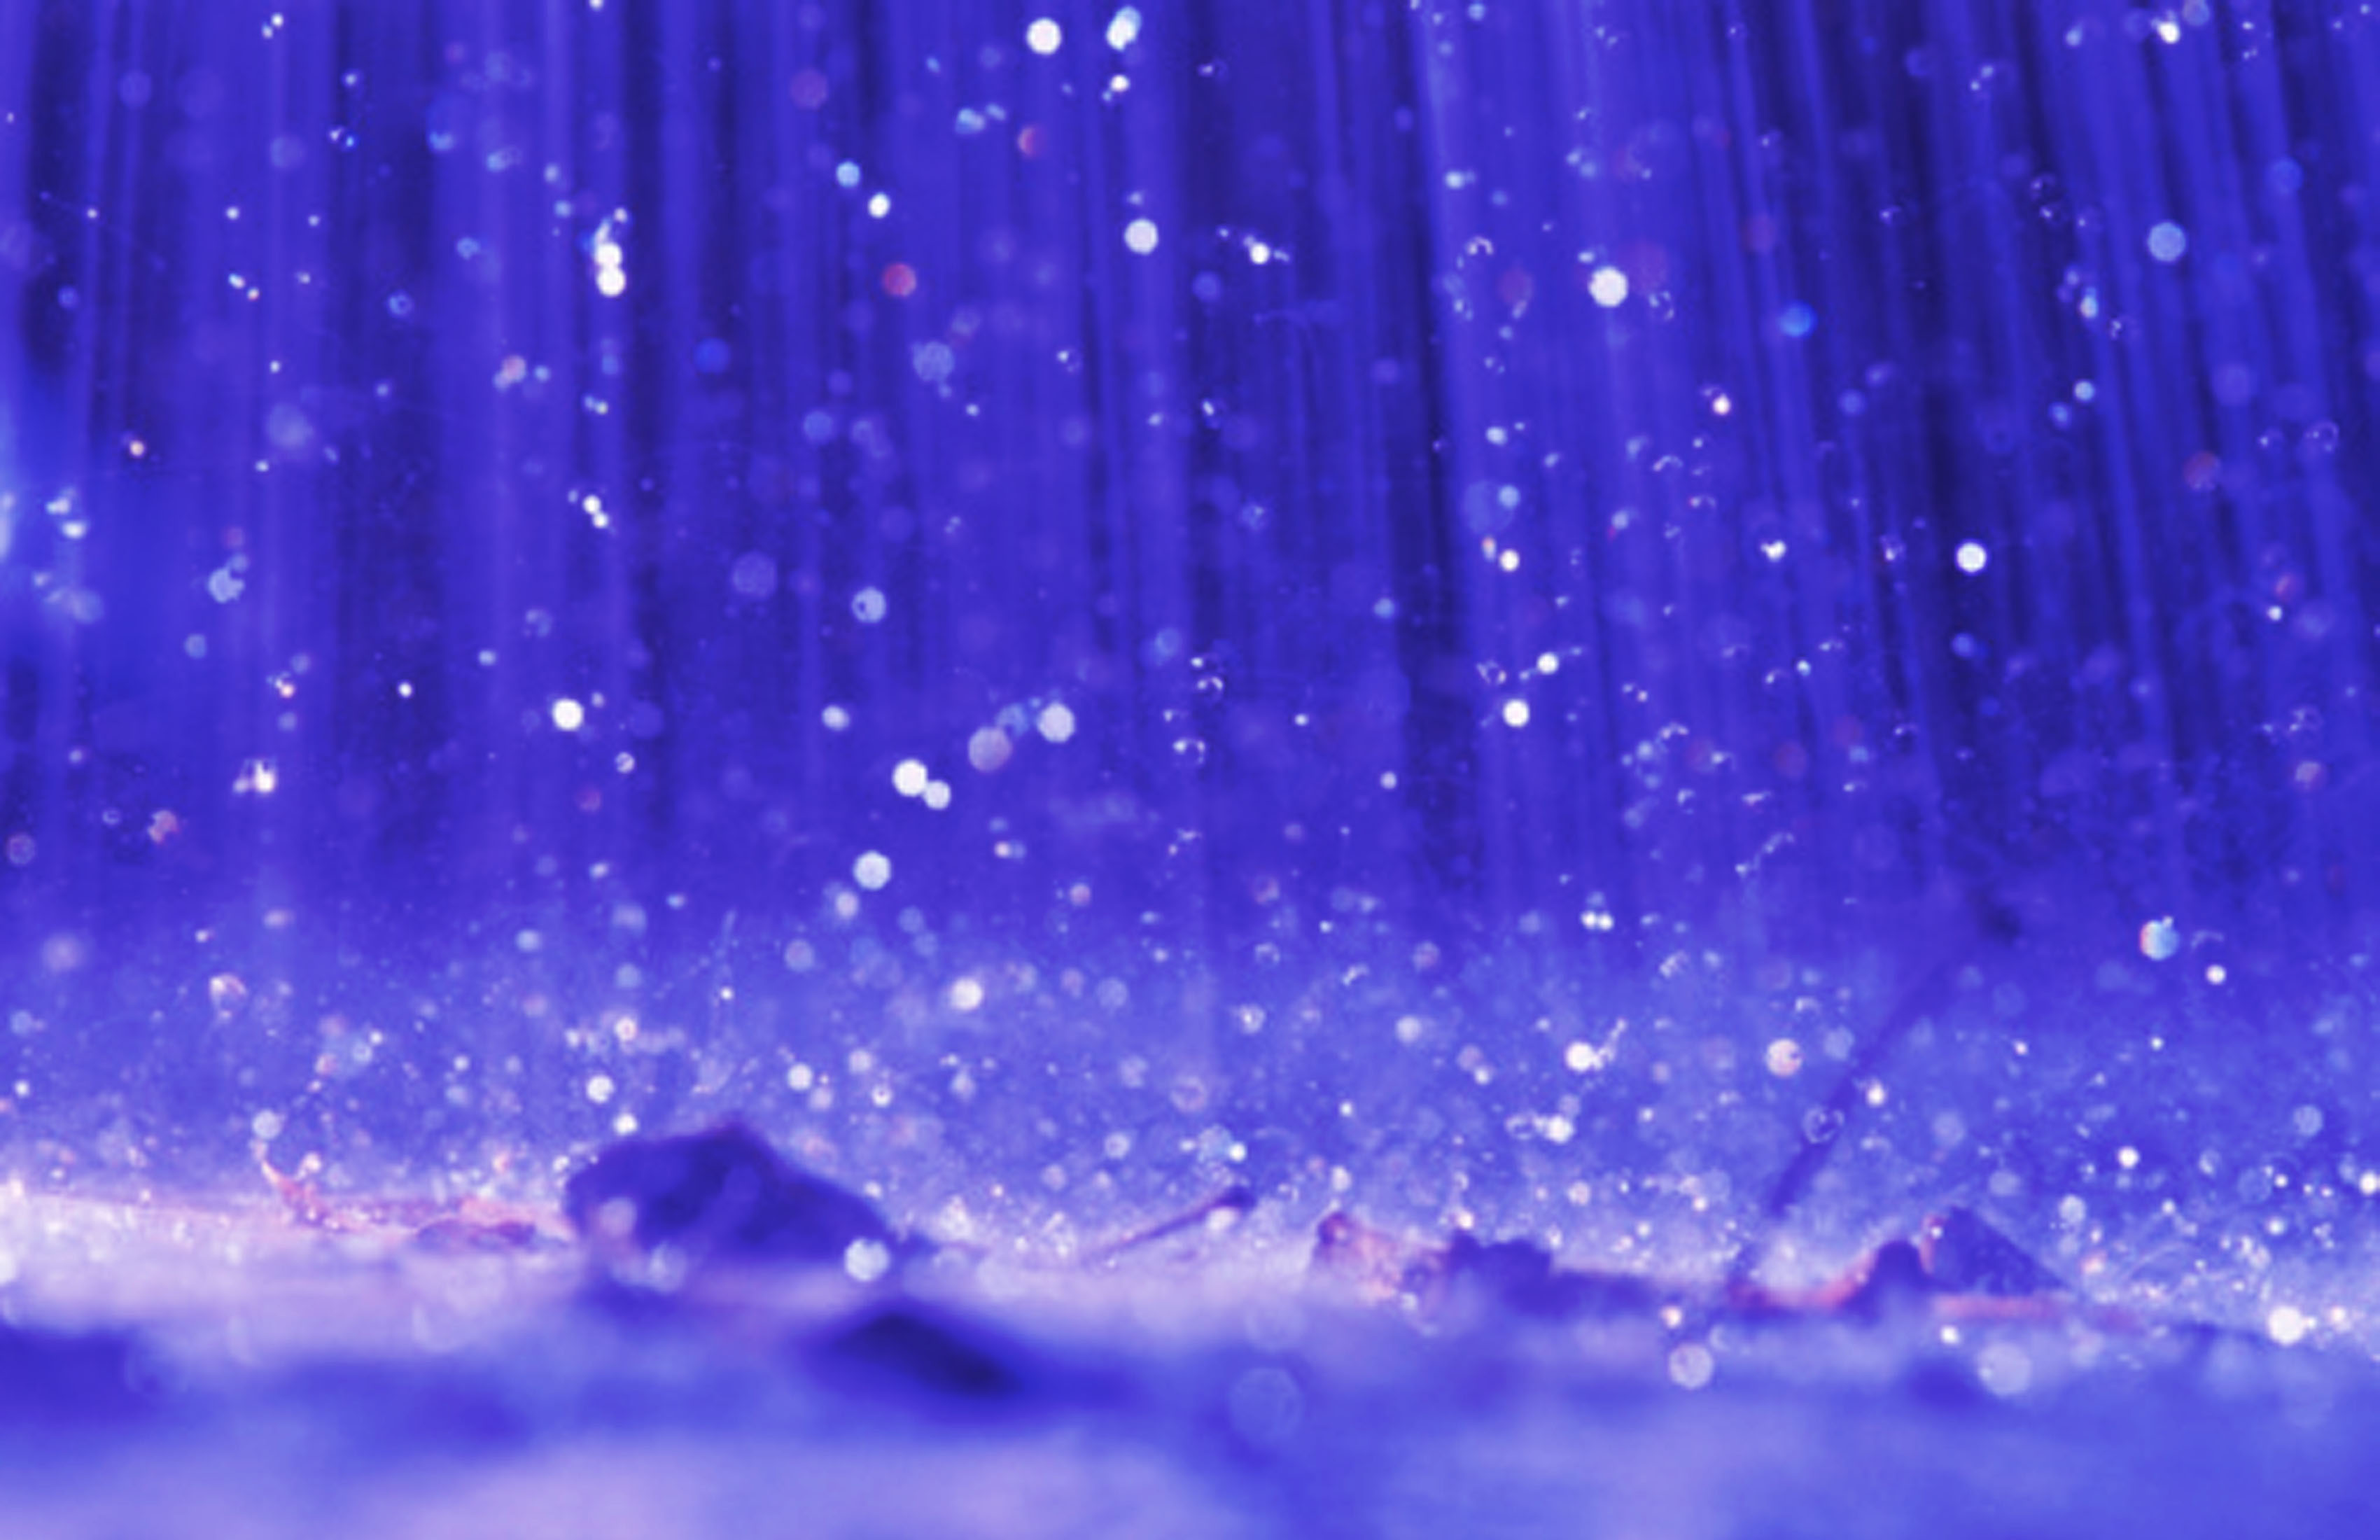 127 Rain HD Wallpapers Backgrounds - Wallpaper Abyss